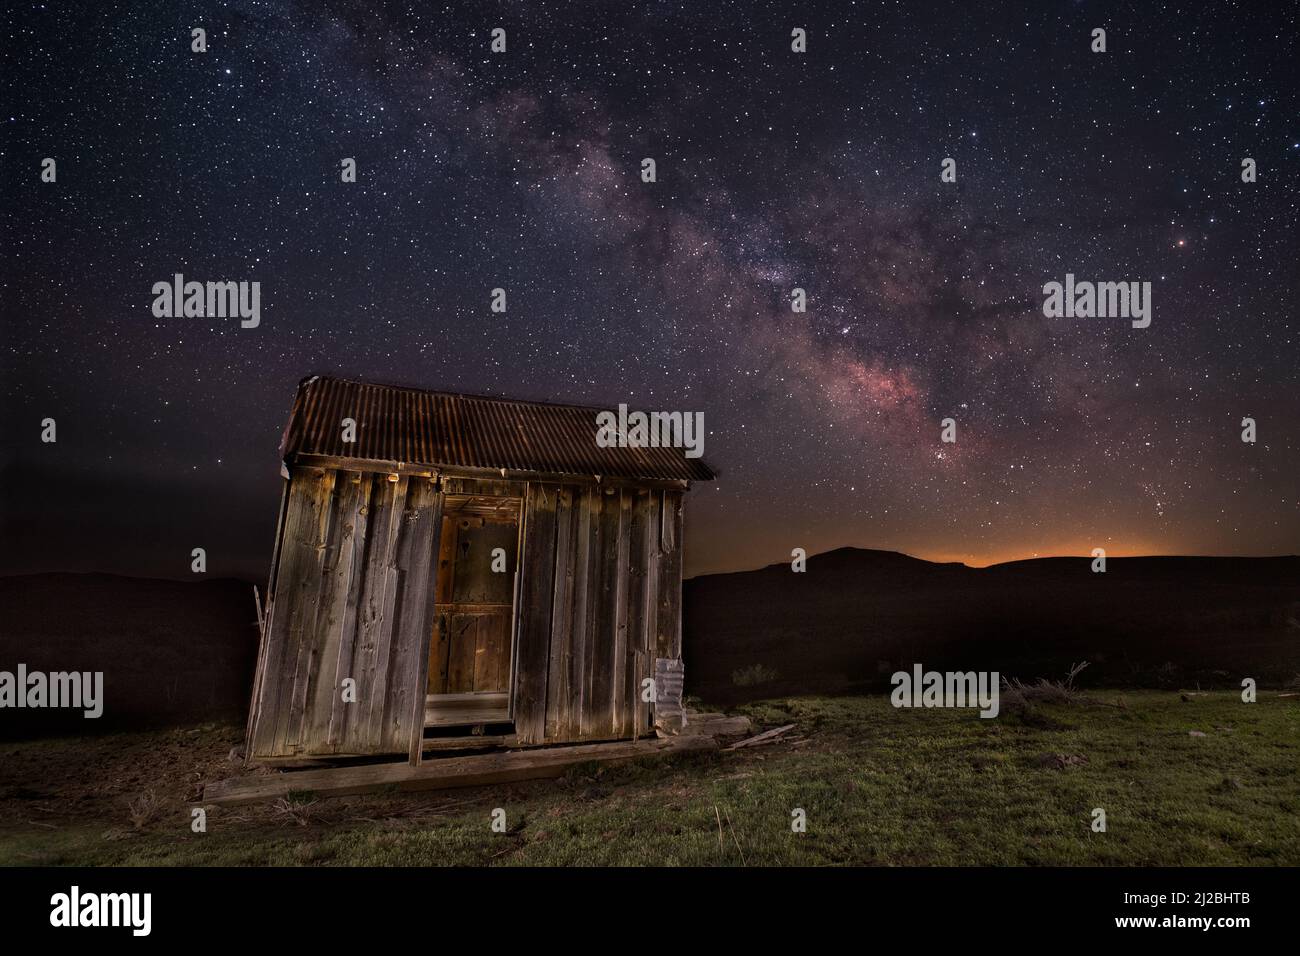 Abandoned shack in the high desert of Lassen County, California, USA.  Photographed at night under the galactic core of the Milky Way. Stock Photo